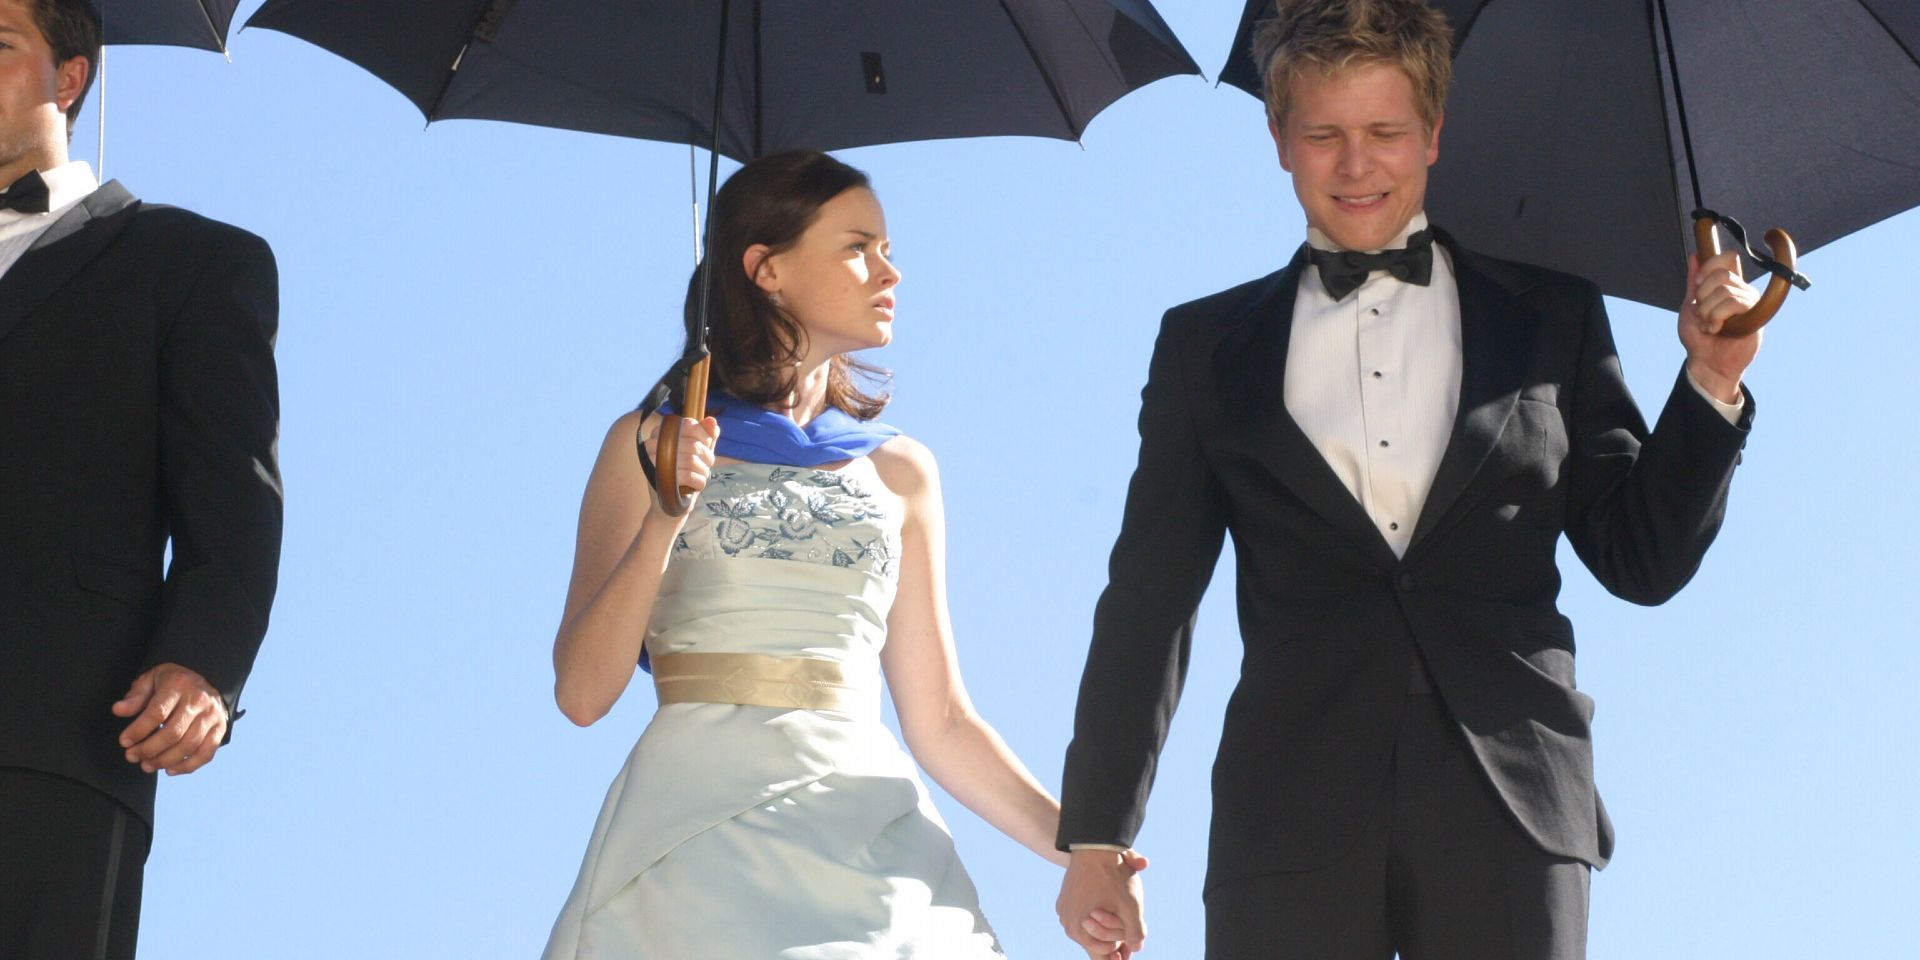 Rory and Logan in formal attire holding black umbrellas in Gilmore Girls